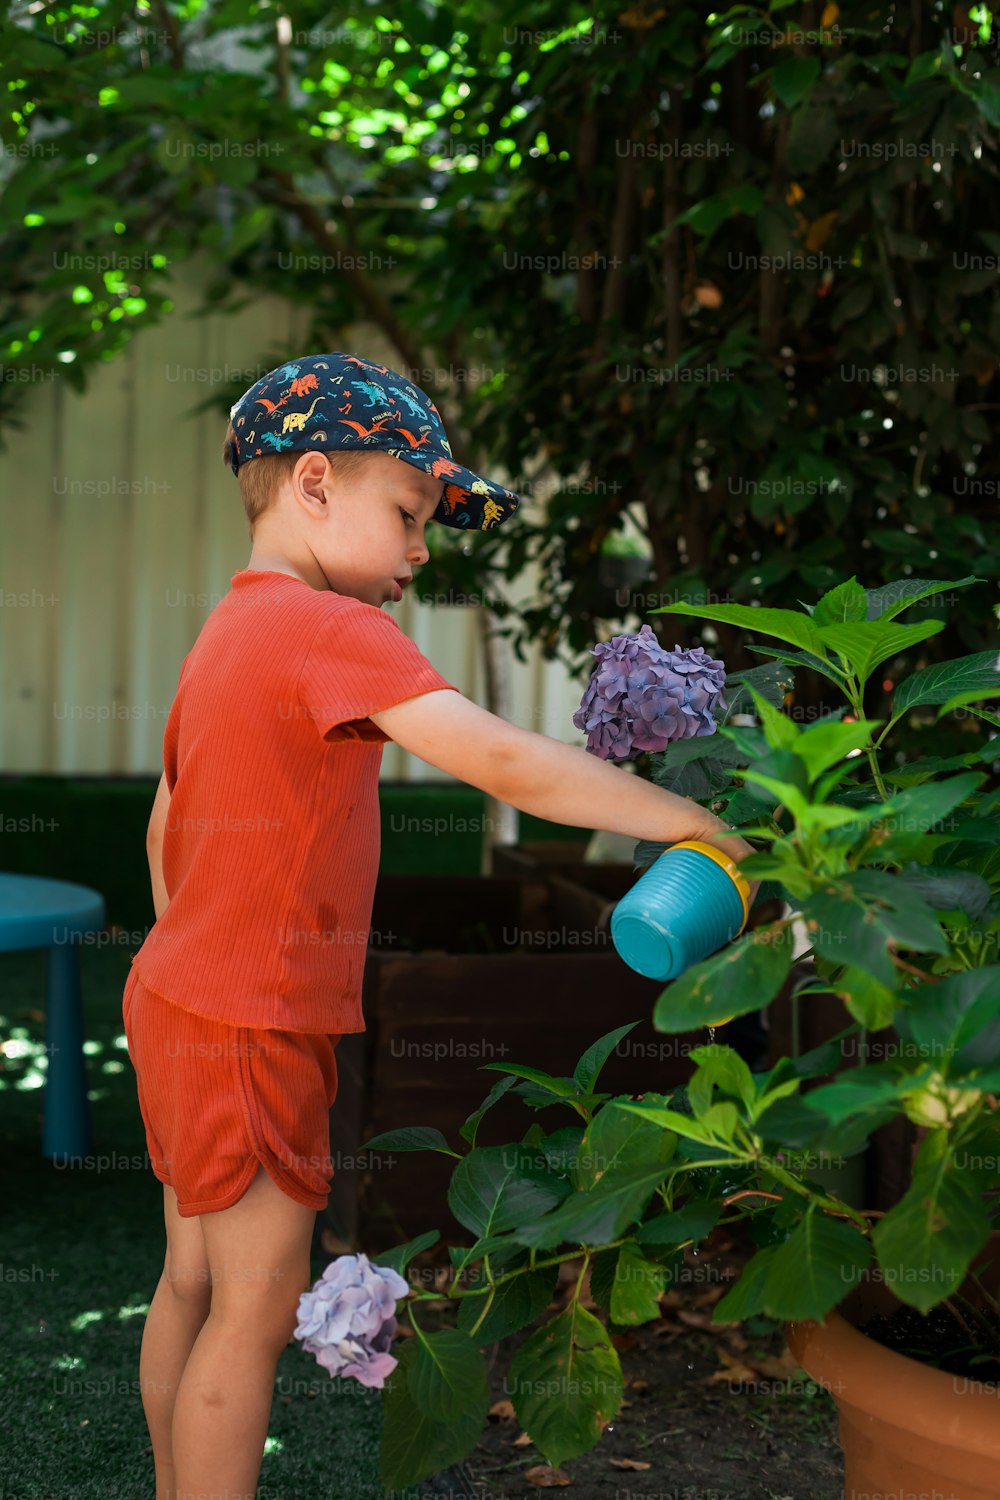 a young boy in a red shirt is watering flowers